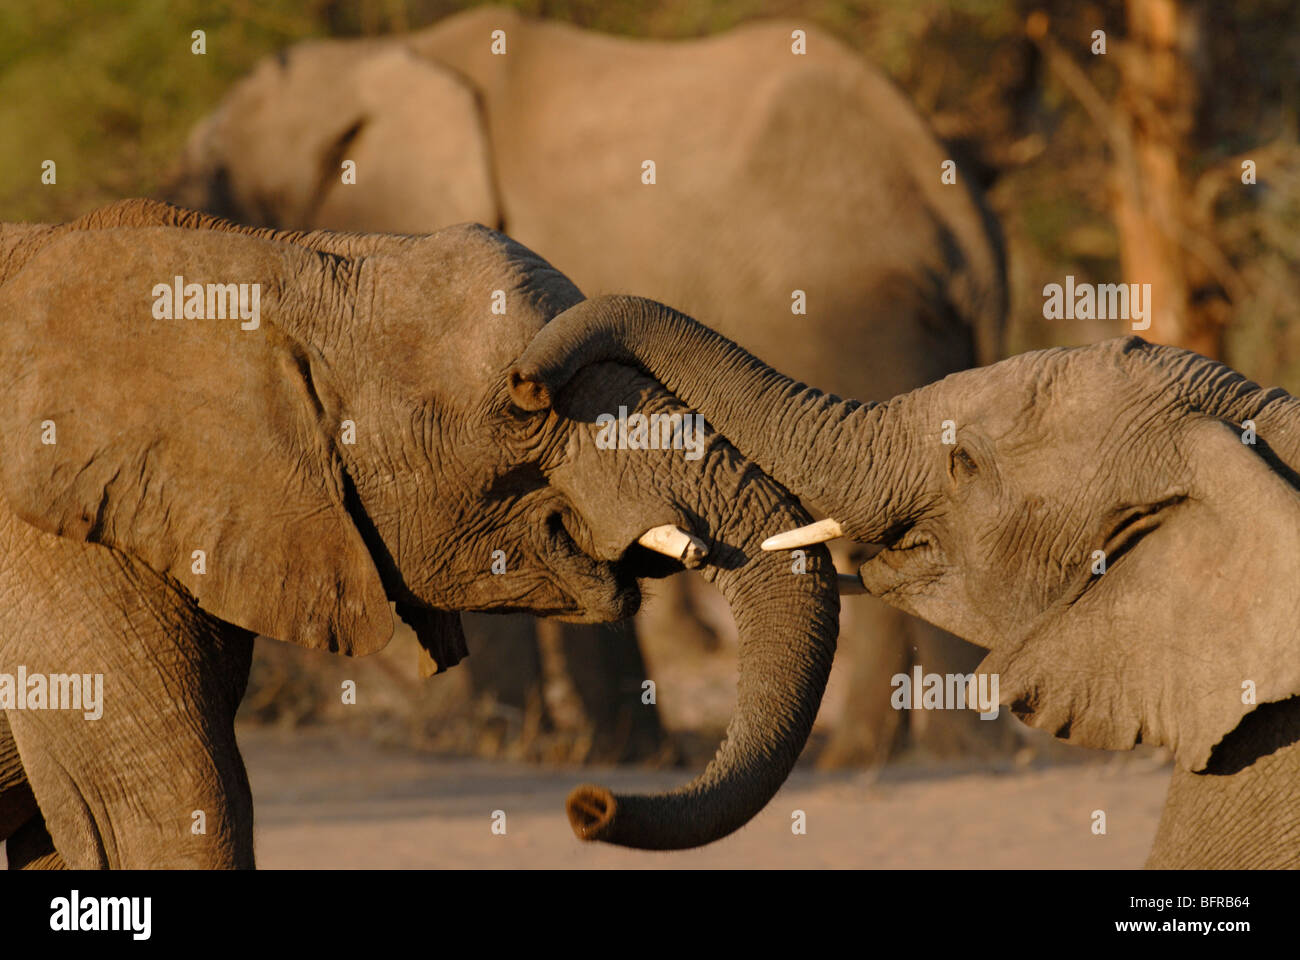 Pair of young elephant bulls sparring Stock Photo